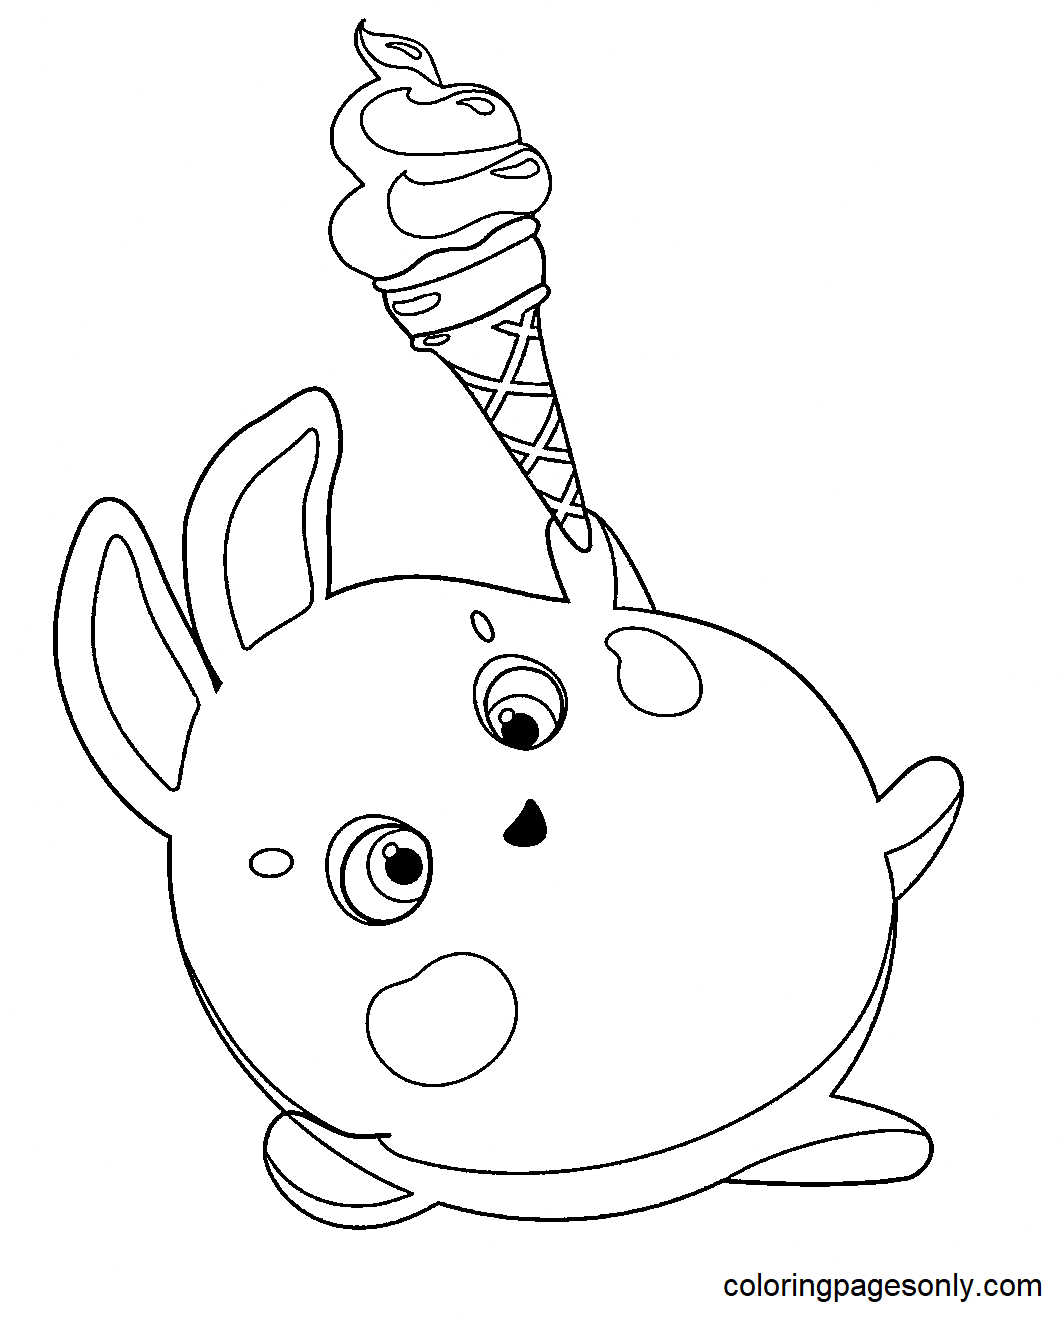 Cute Big Boo Coloring Page